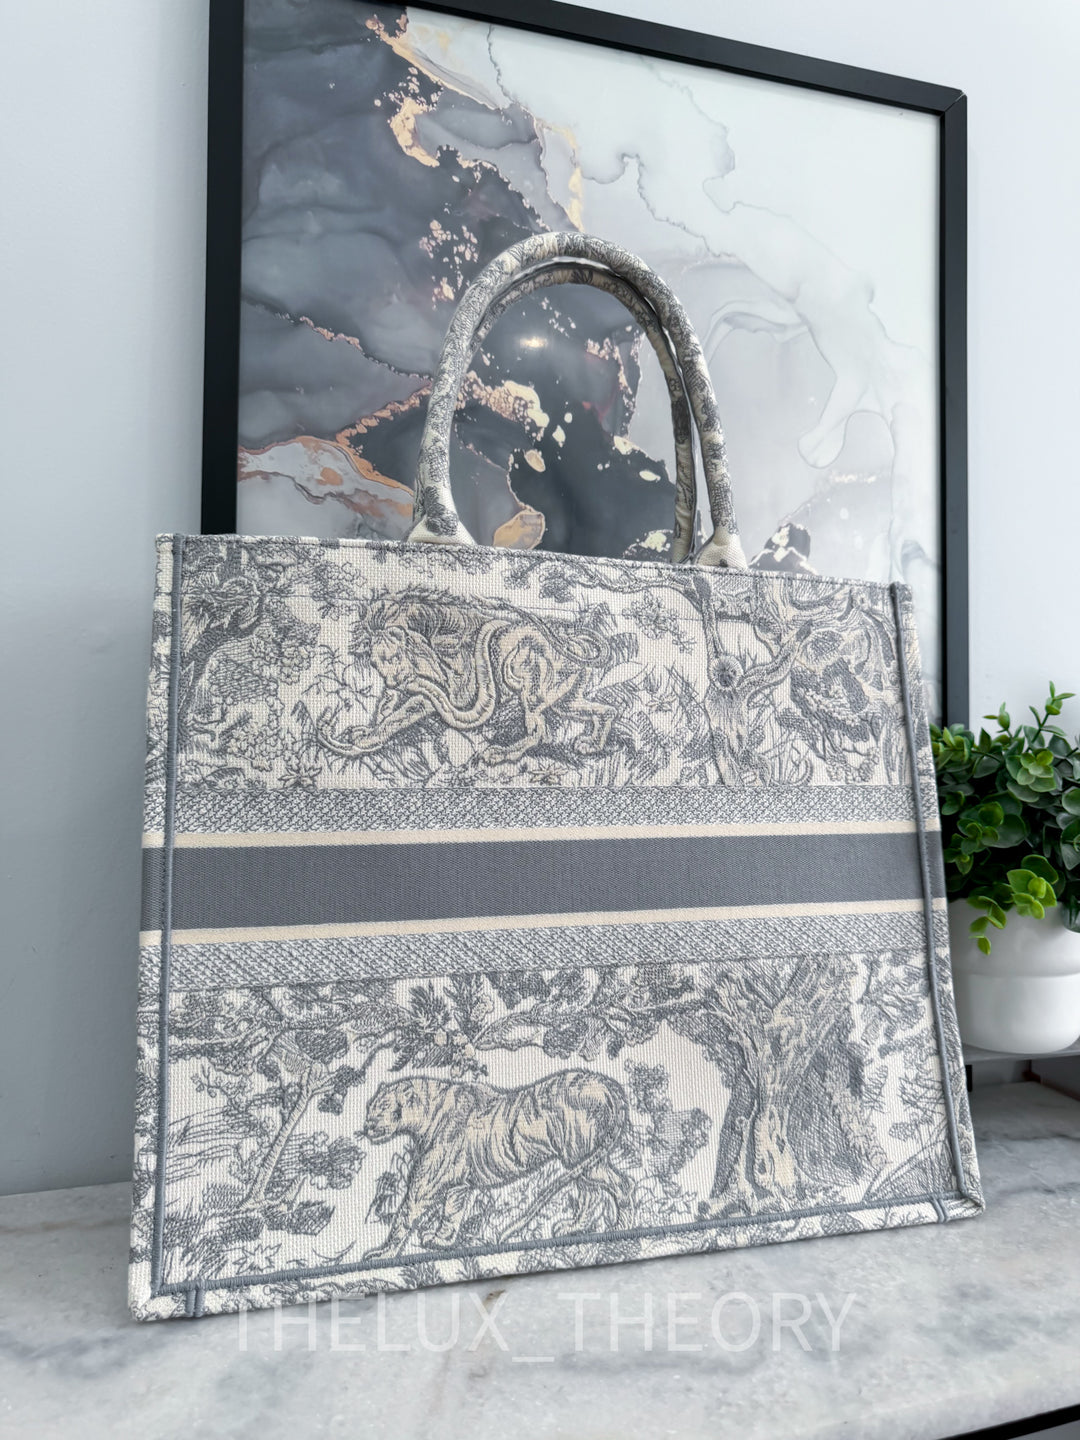 BOOK TOTE LARGE TOILE DE JOUY GREY 2021